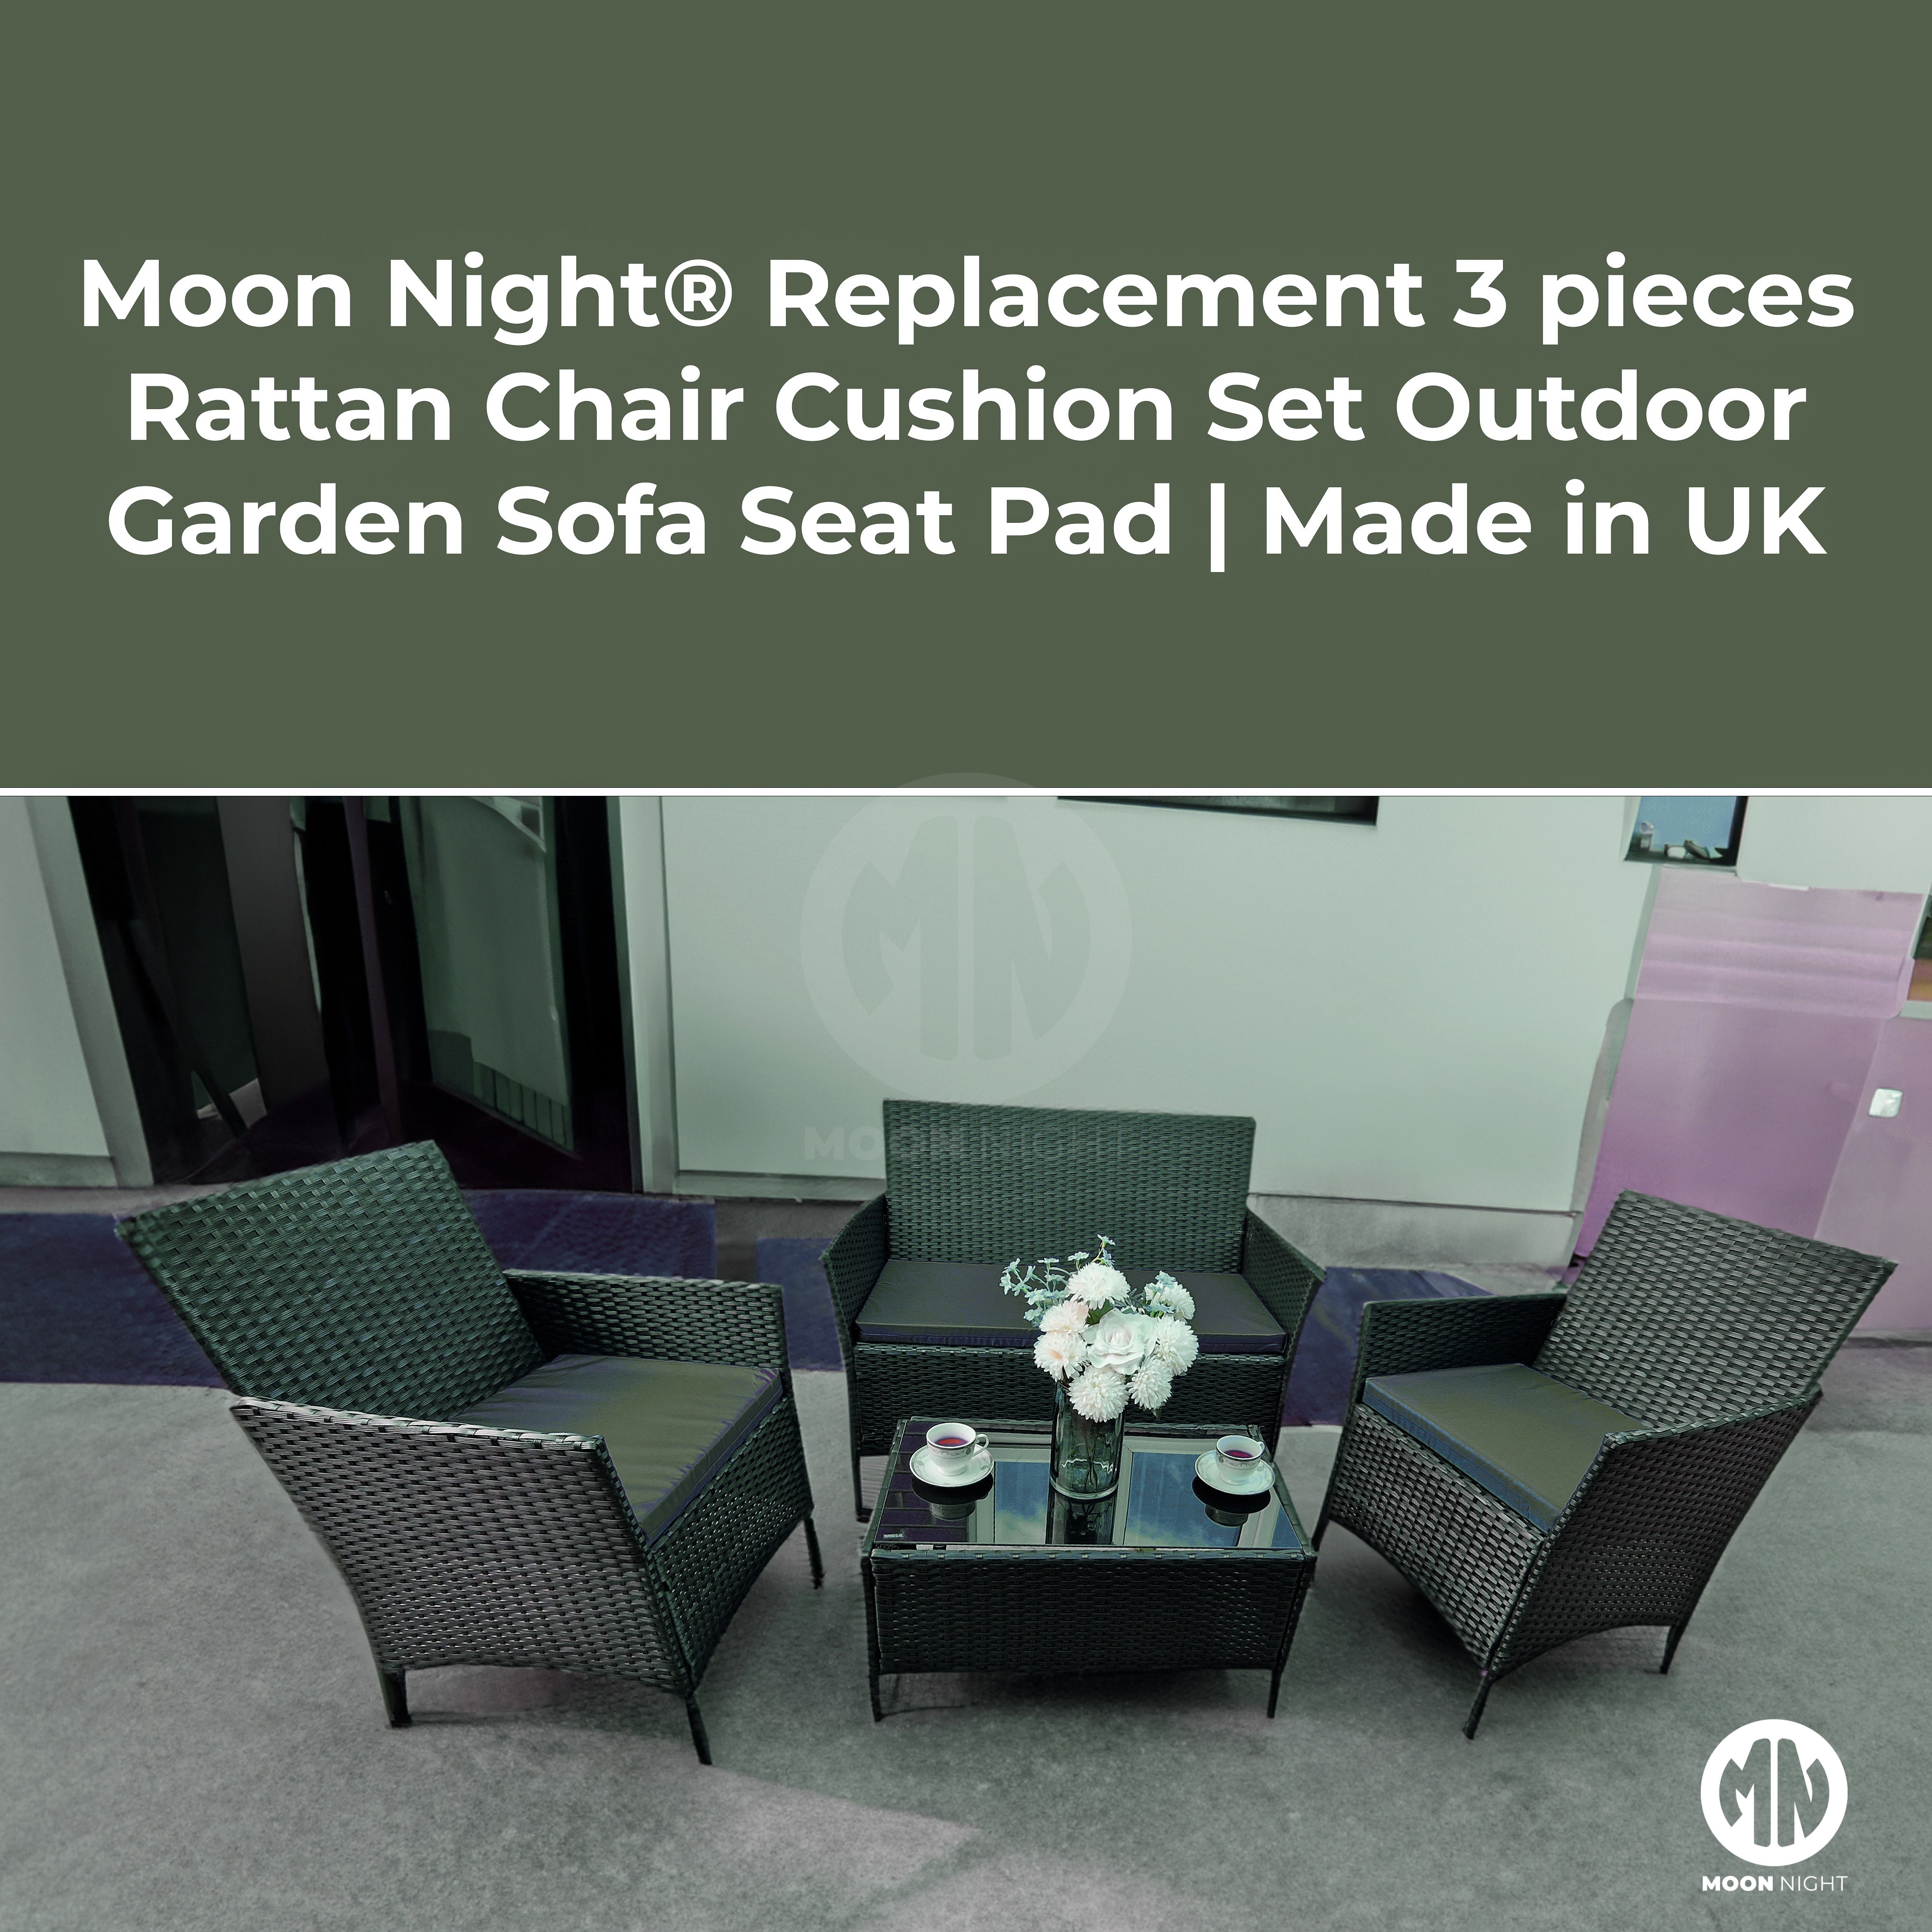 Moon Night® Replacement 3 pieces Rattan Chair Cushion Set Outdoor Garden Sofa Seat Pad [Made in UK]- Olive Green